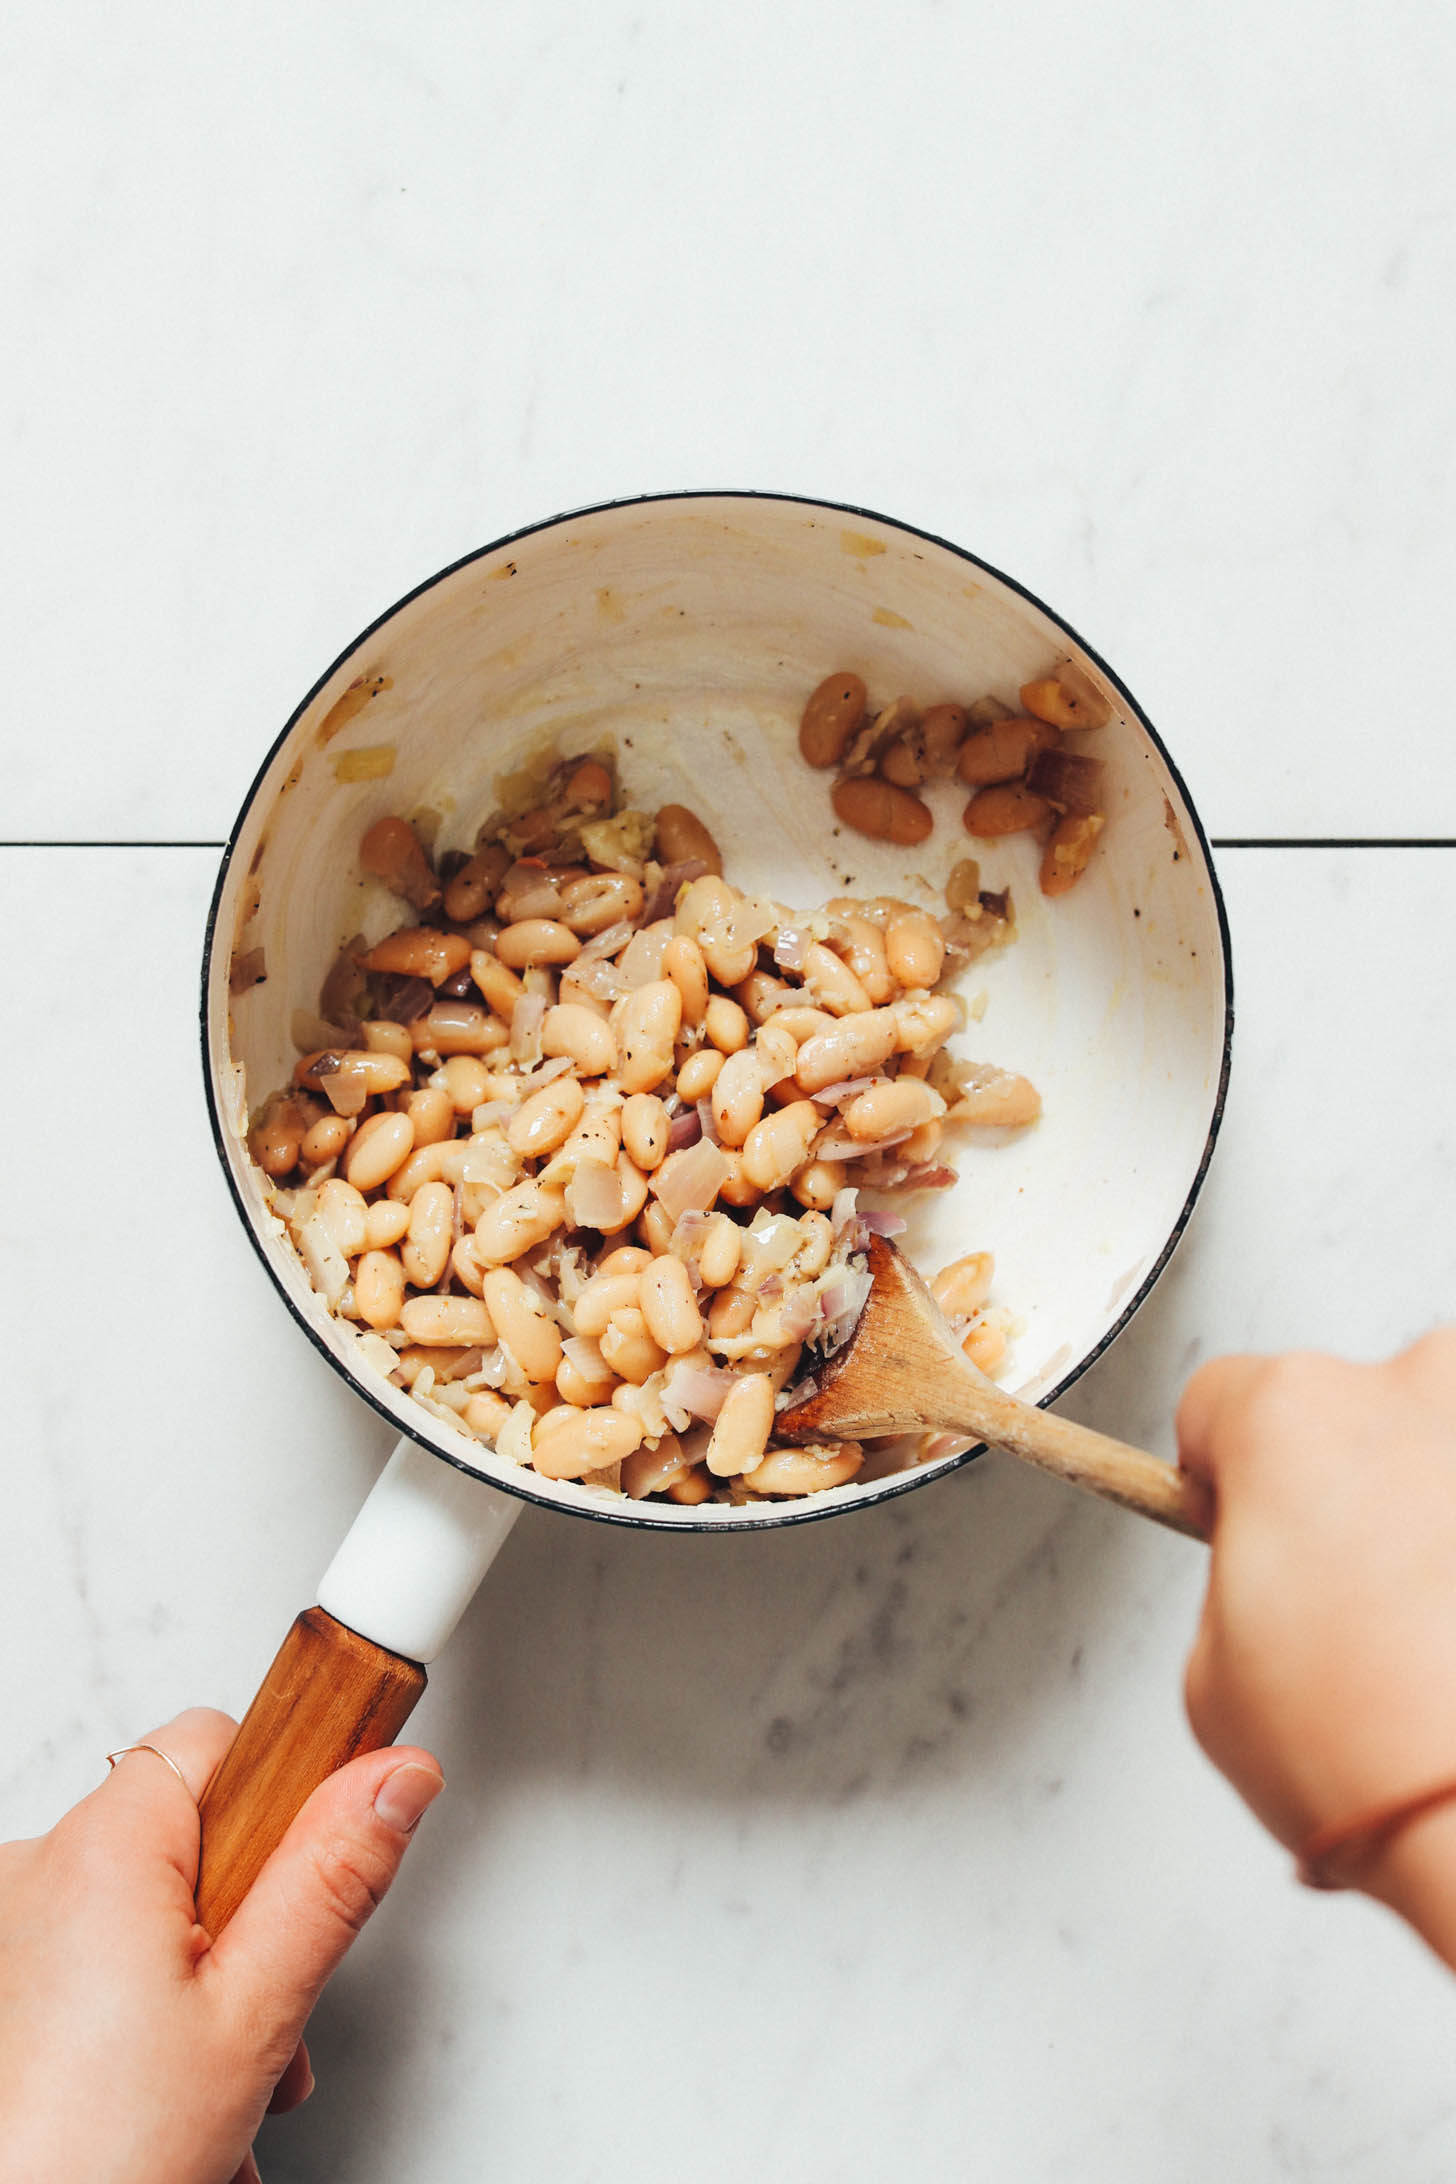 Cooking shallot, garlic, and white beans in a saucepan